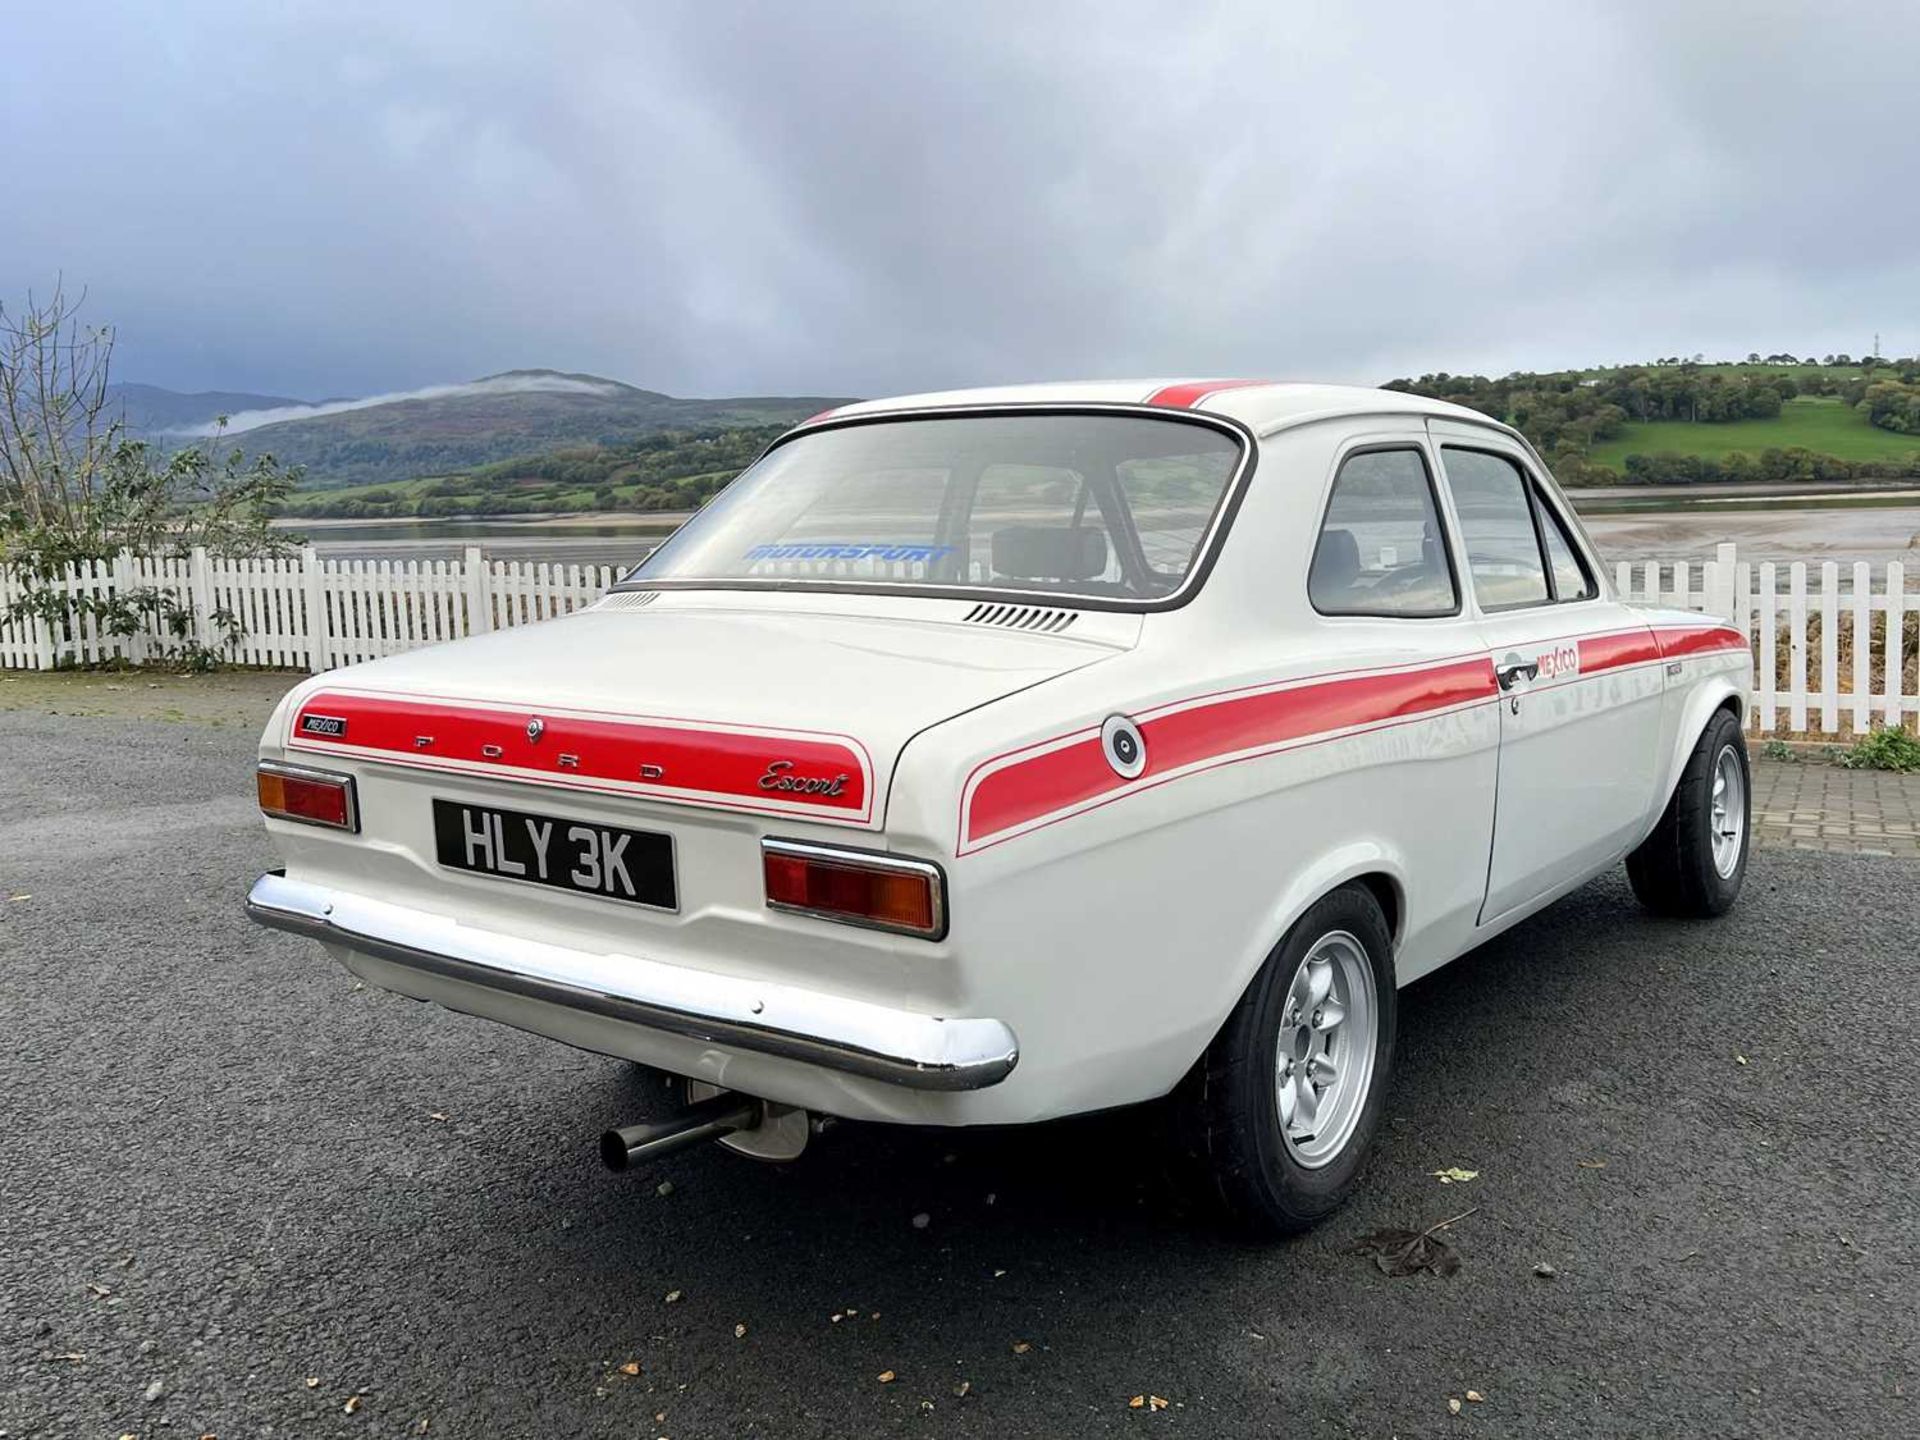 1971 Ford Escort Mexico with 2.1-litre Cosworth engine 2.1-Litre naturally aspirated Cosworth engine - Image 19 of 55